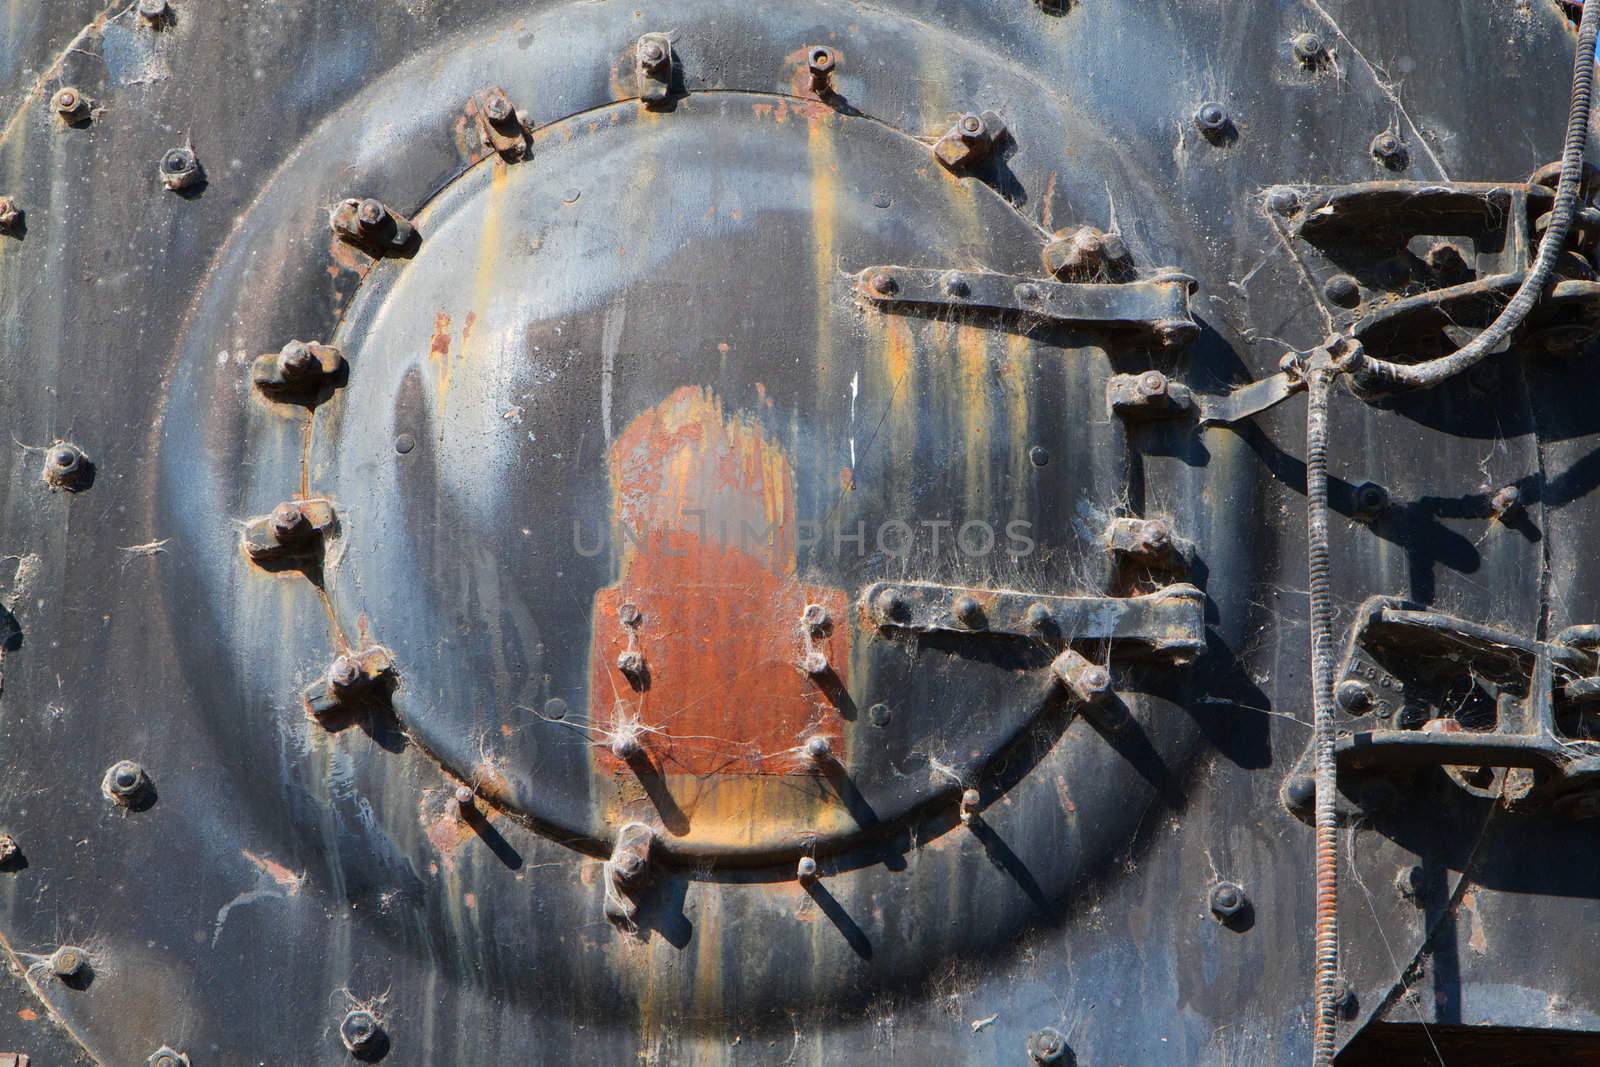 Rusted brightly lit boiler cap on front end of railroad engine